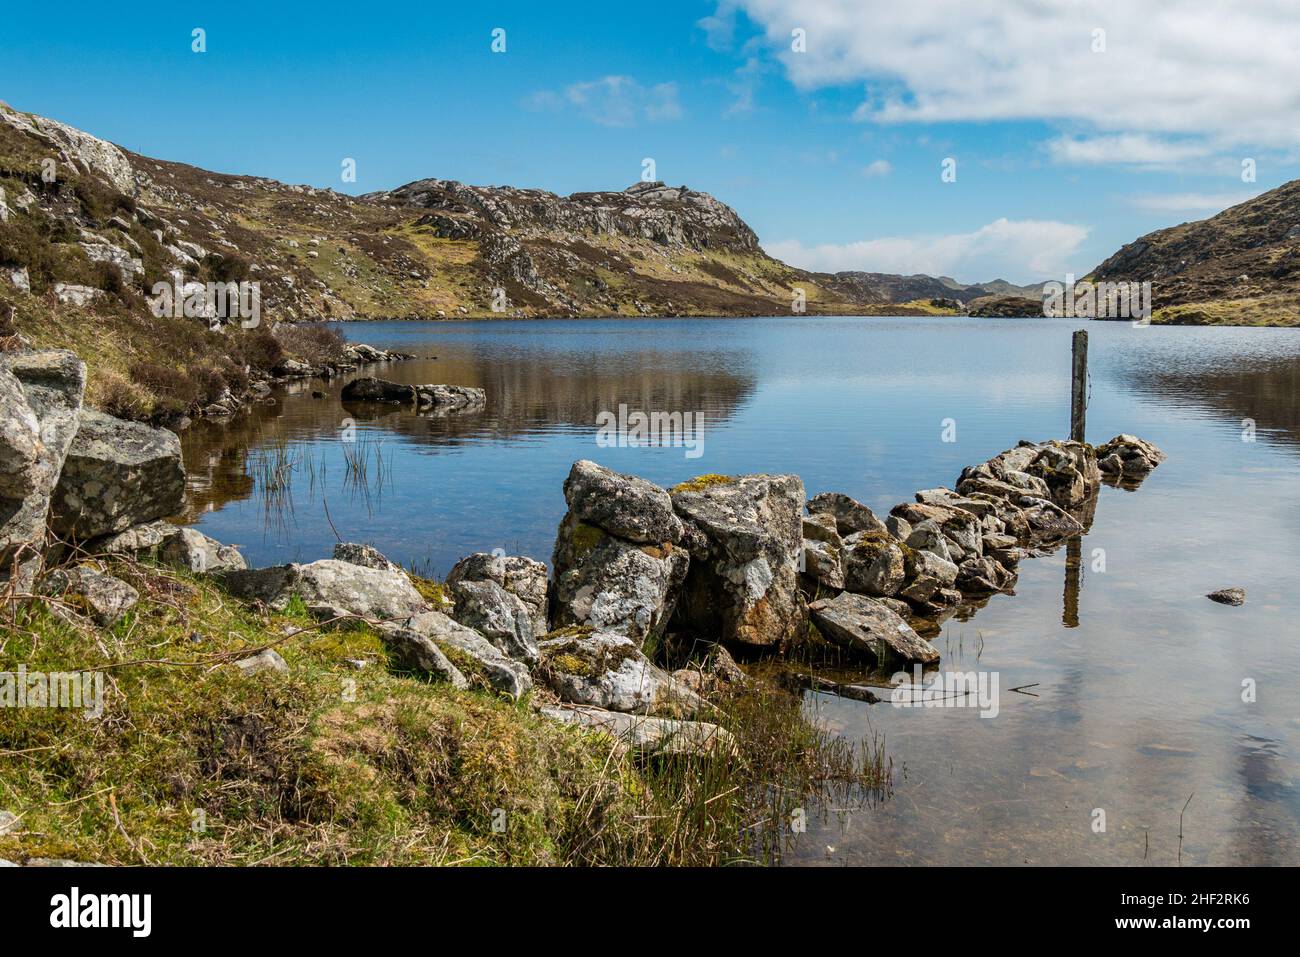 Ruined wall juts out into the still waters of Loch Dubh in Summer, Cromore, Isle of Lewis, Scotland, UK Stock Photo